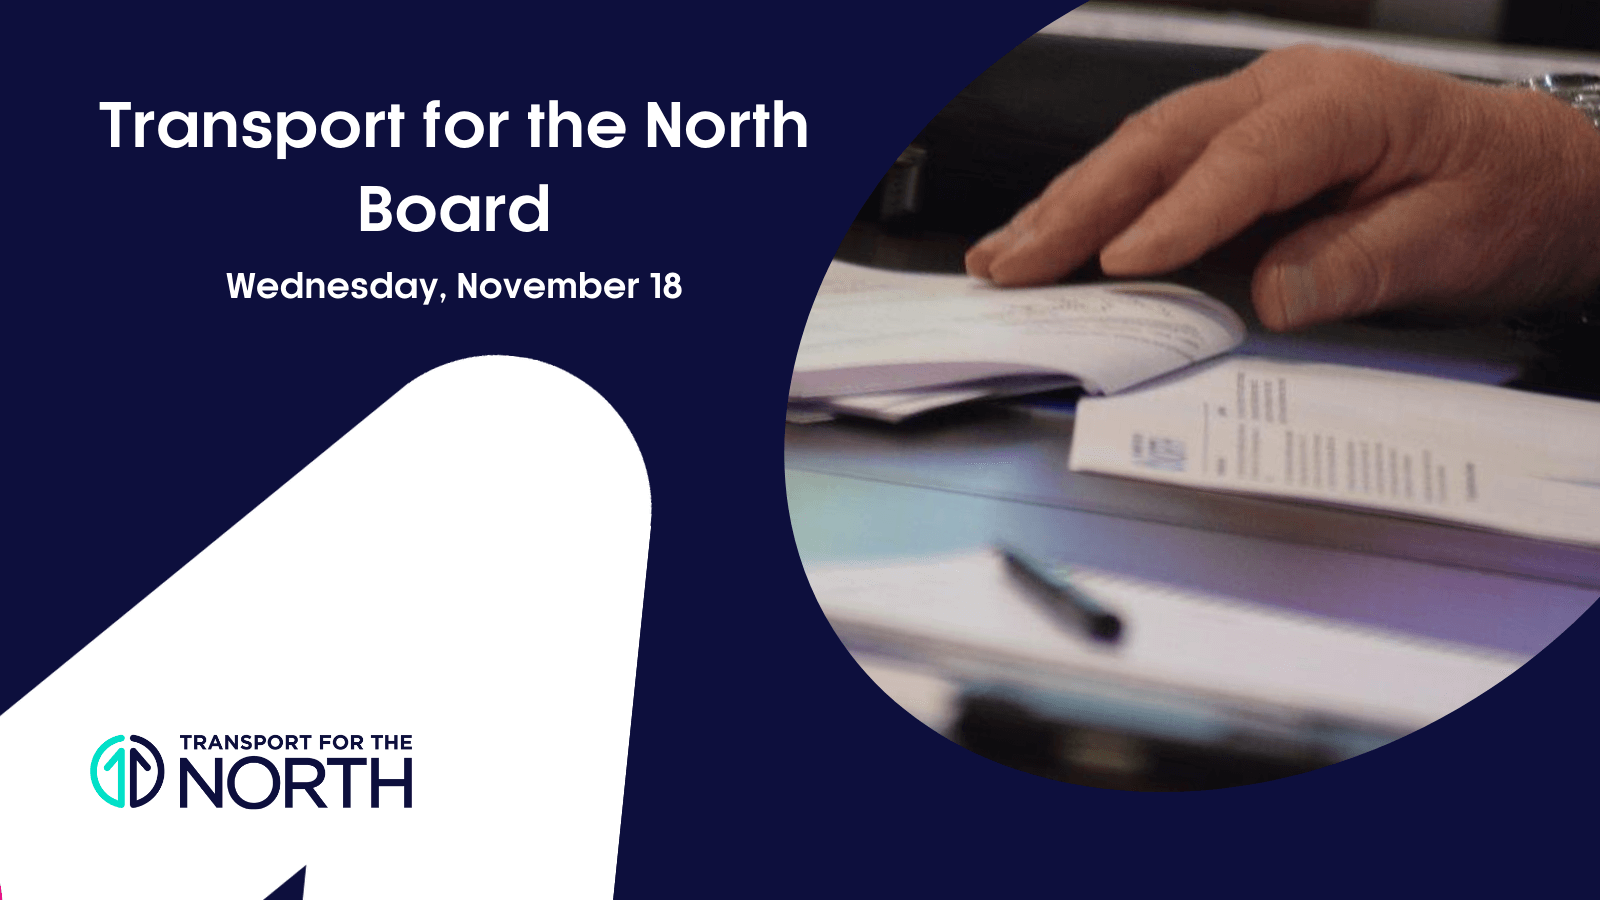 Transport for the North Board meeting November 18